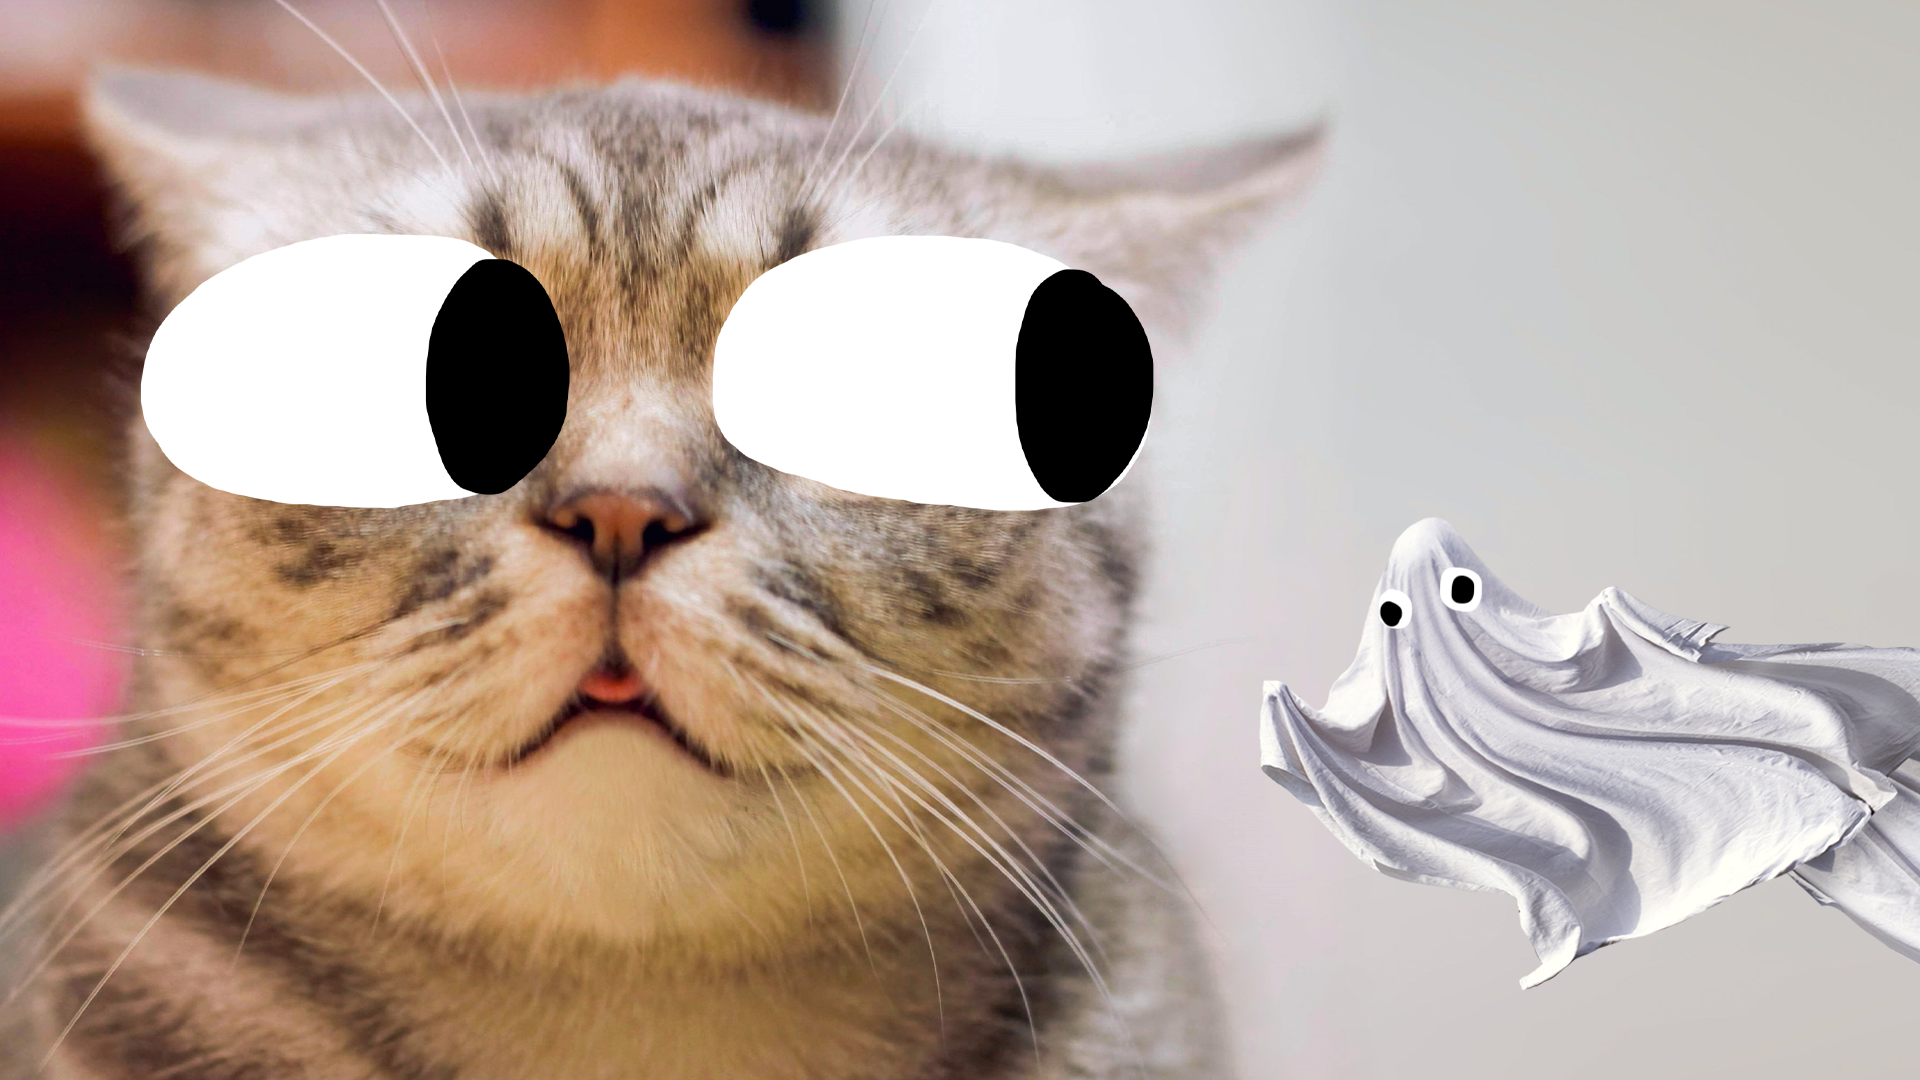 Alarmed cat and Beano ghost